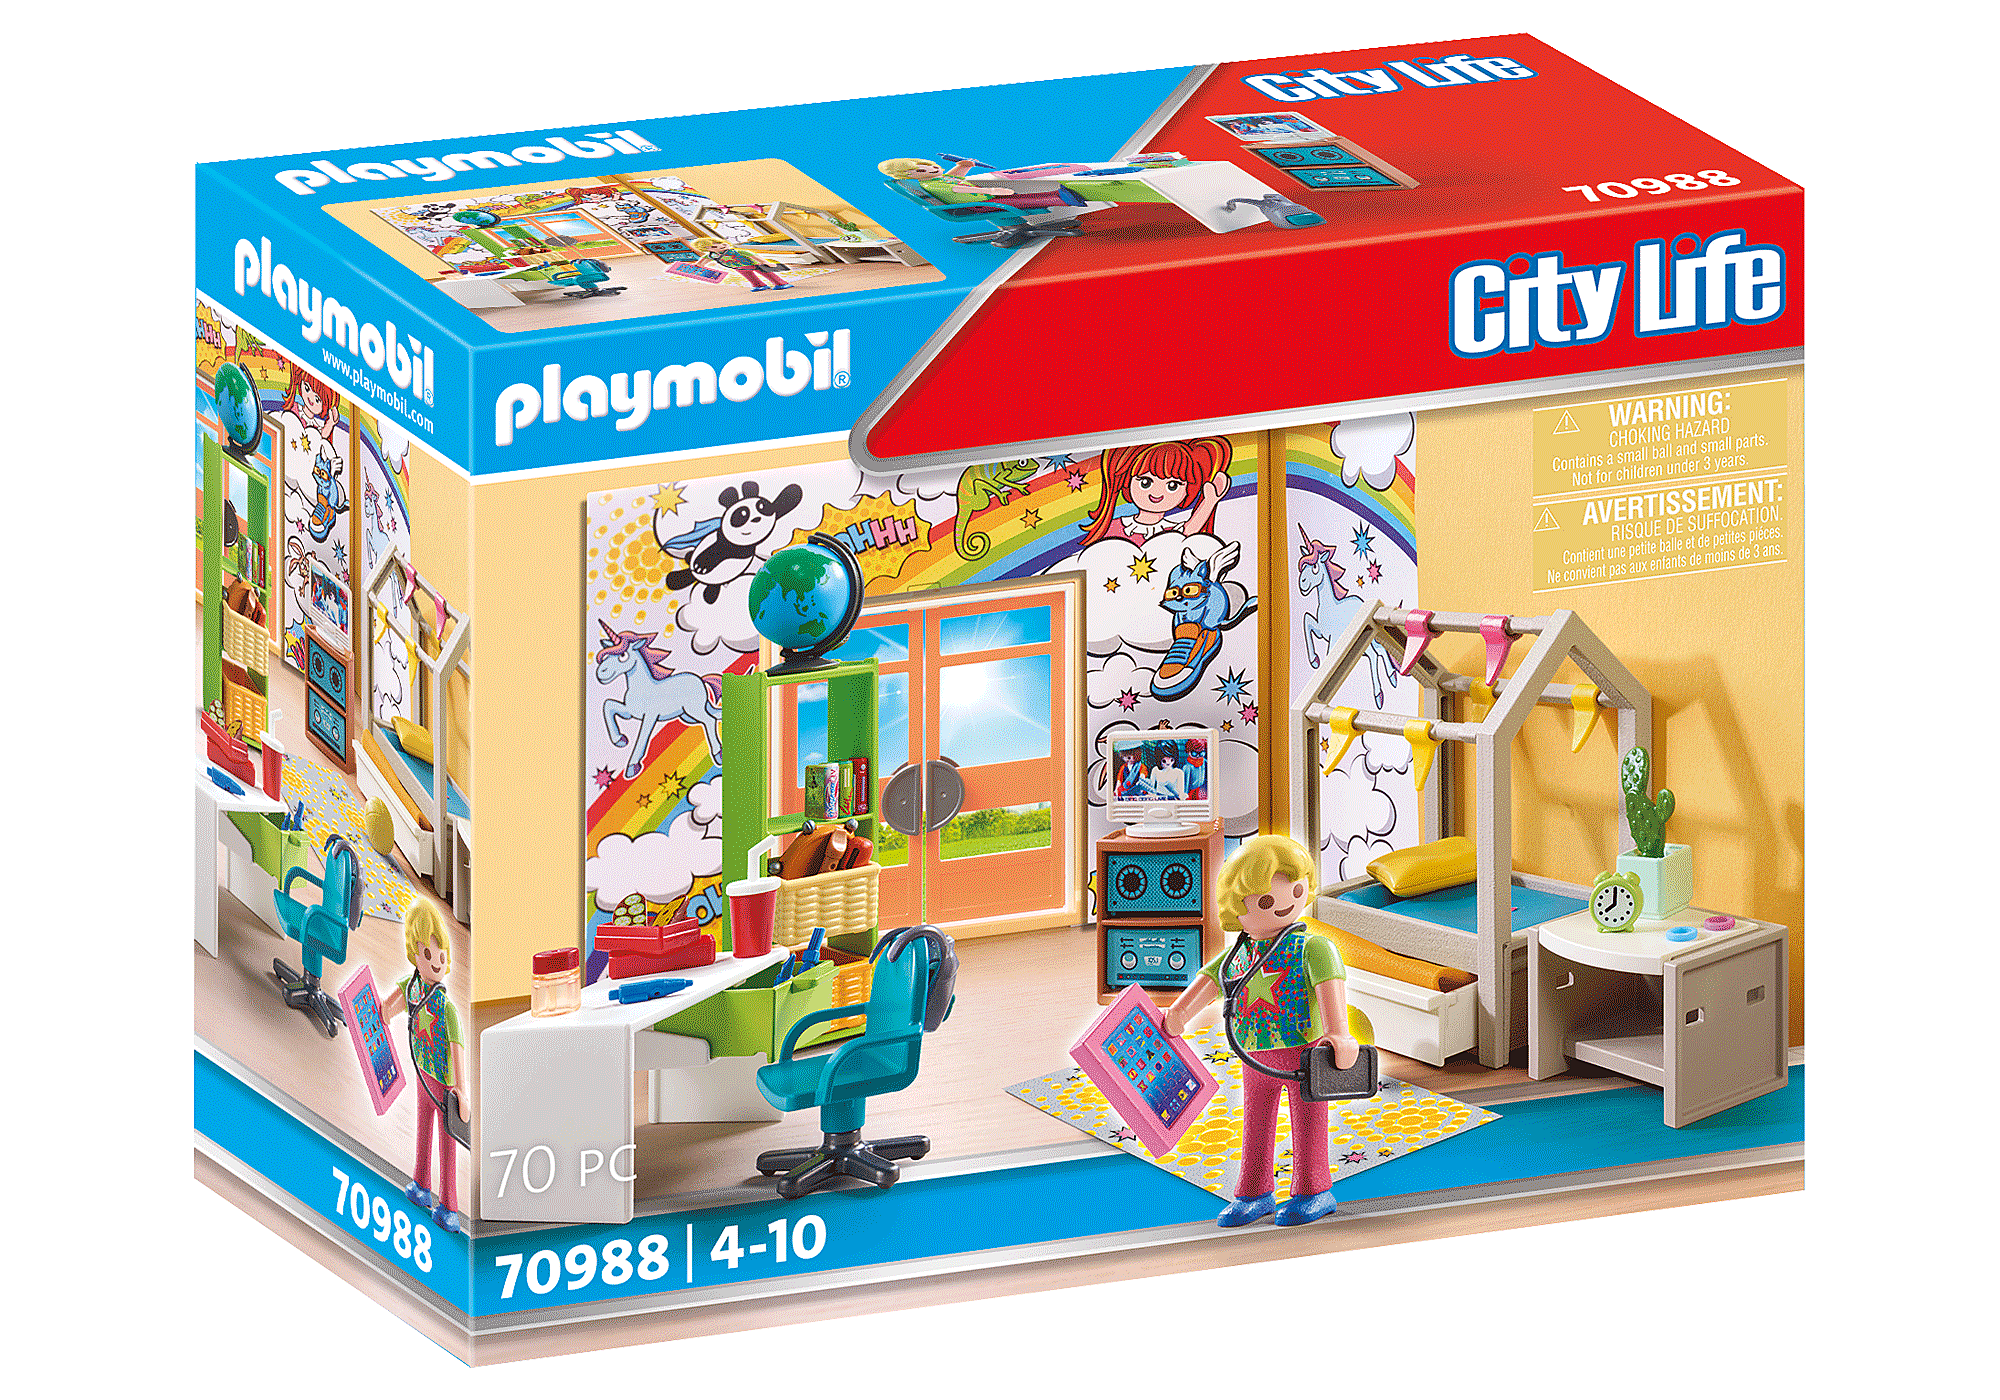 Playmobil - Fillette/chat